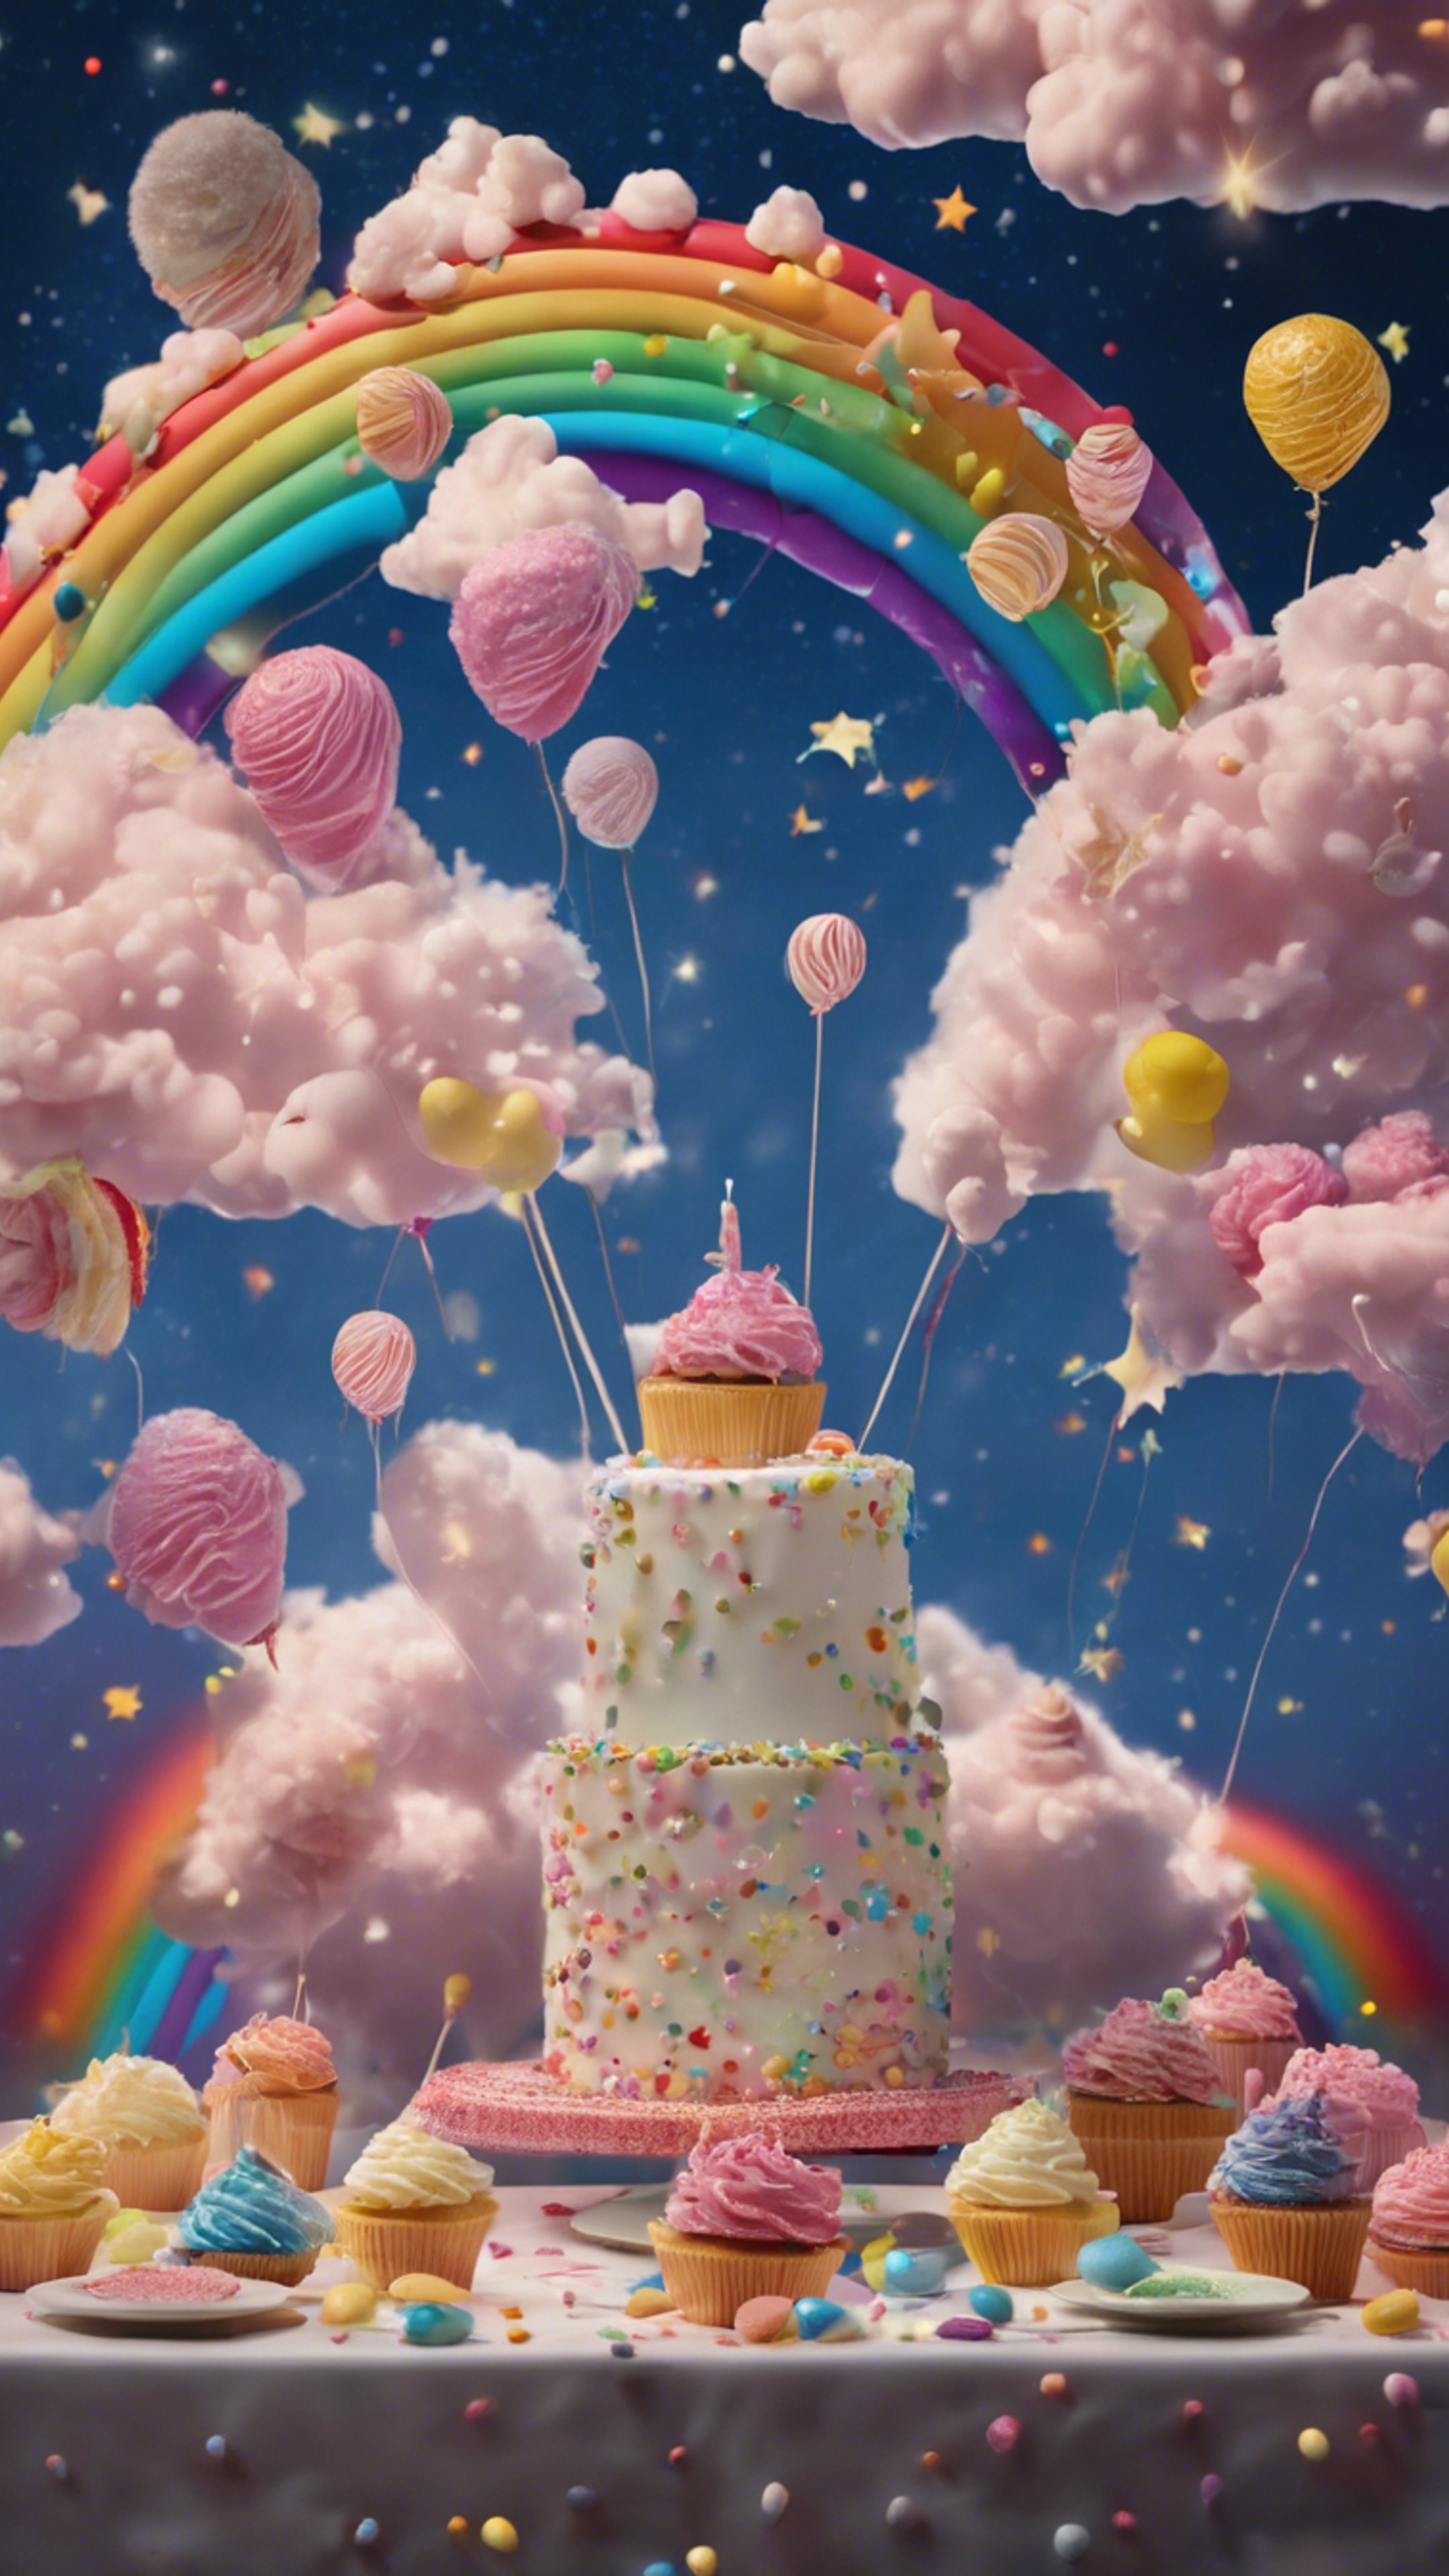 Surreal representation of a birthday party with floating cakes, candies amid fluffy clouds and rainbows discordantly juxtaposed against a starry night sky. Tapet[7f18c2fd7760424e83fc]